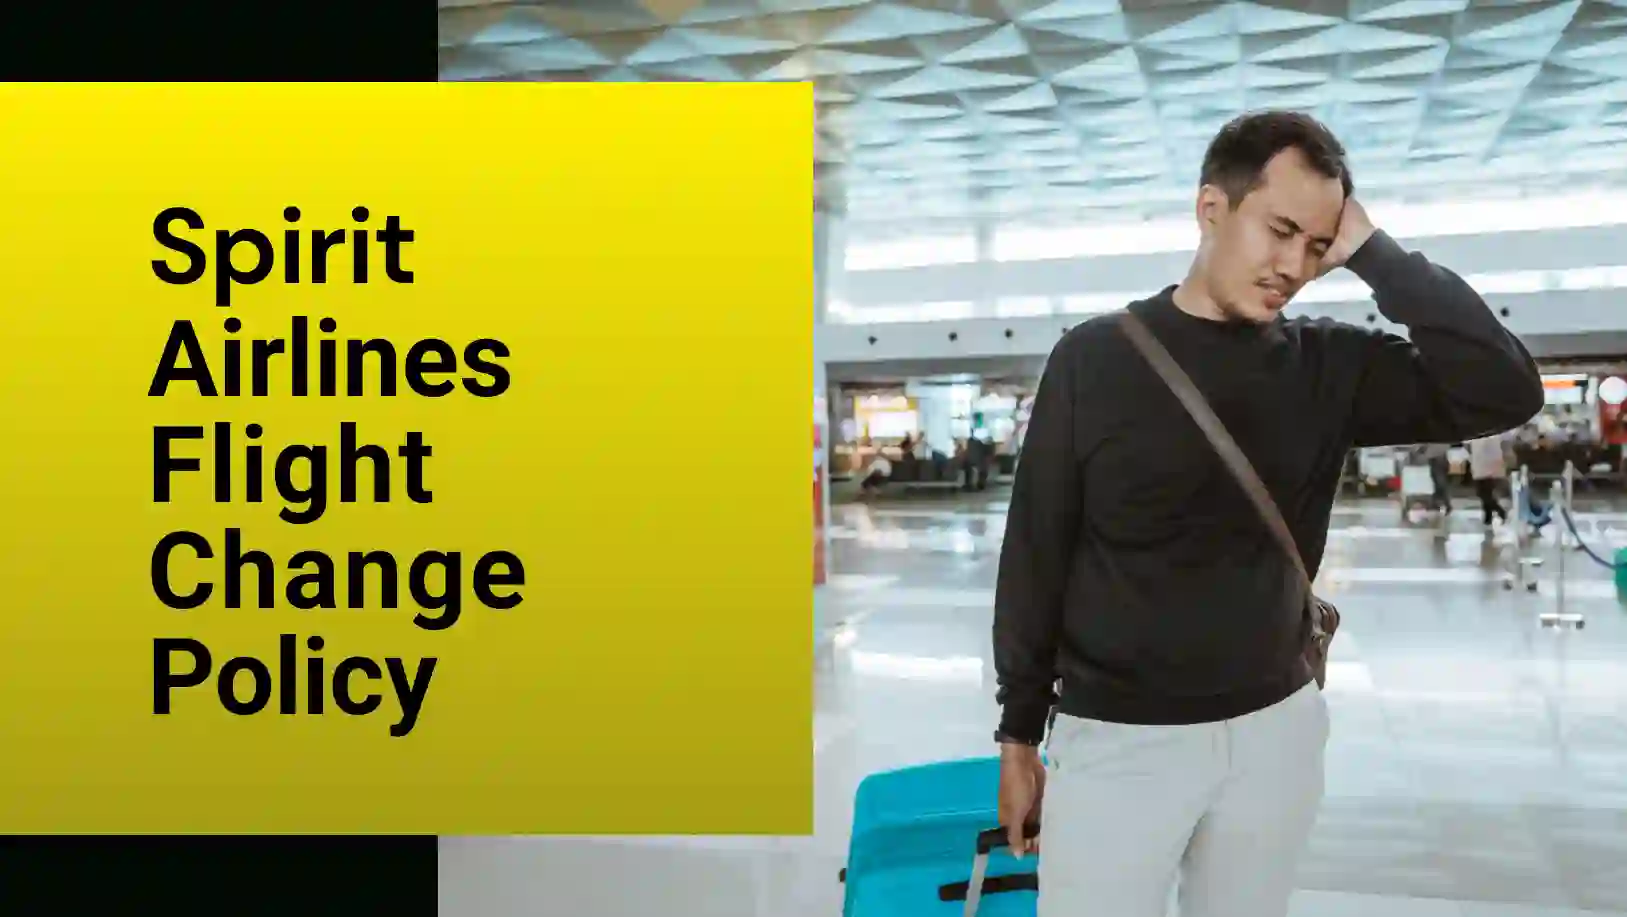 Check Spirit Airlines Flight Change Policy